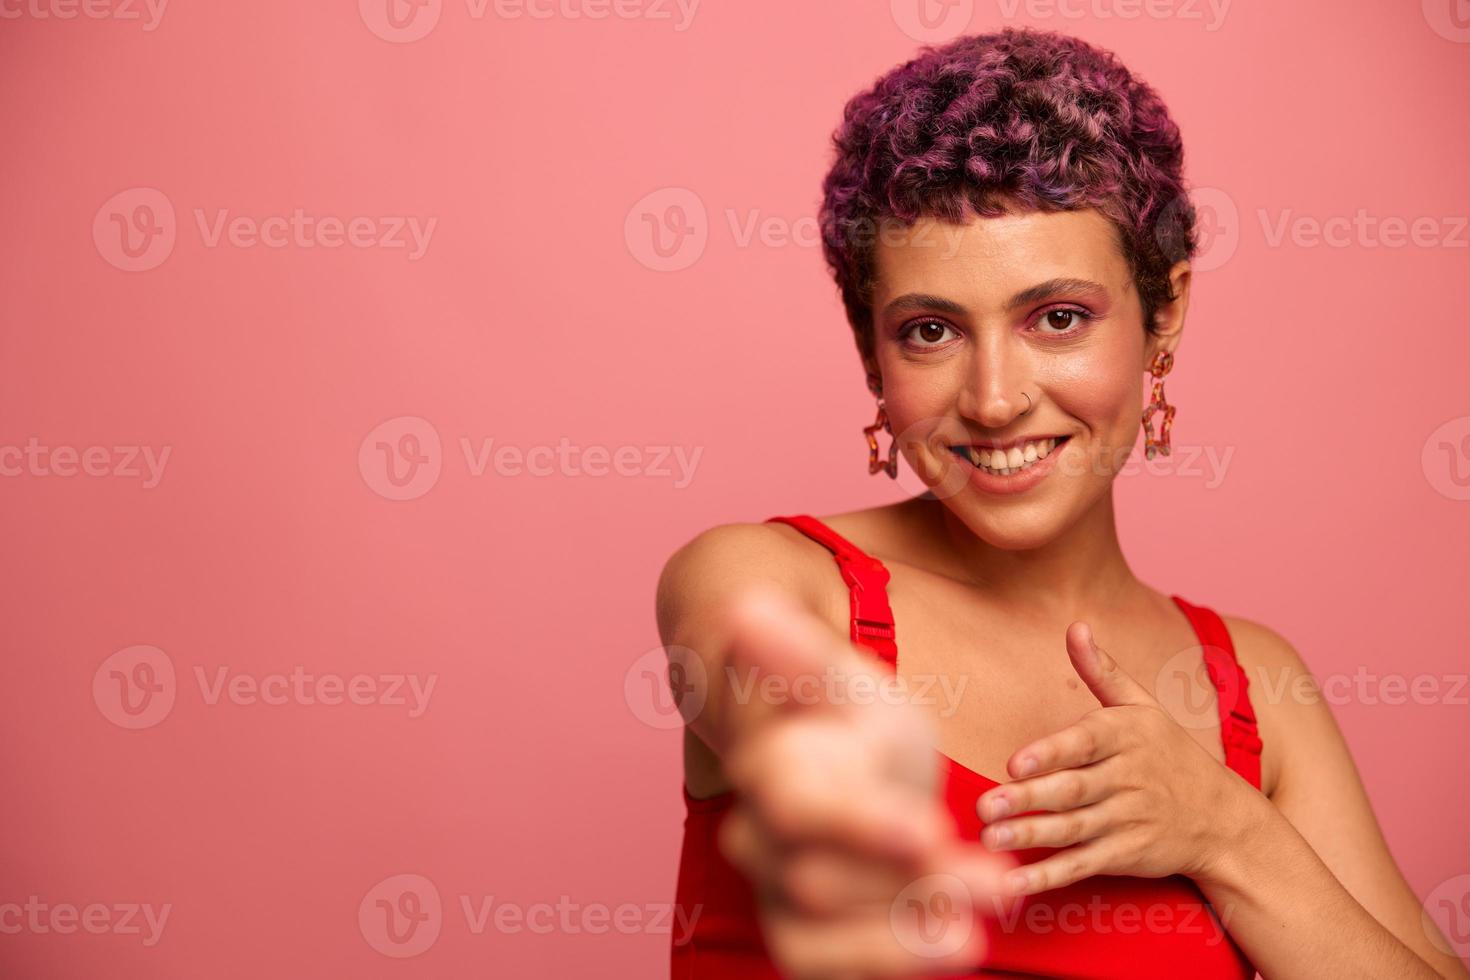 Fashion portrait of a woman with a short haircut of purple color and a smile with teeth in a red top on a pink background dancing happily photo